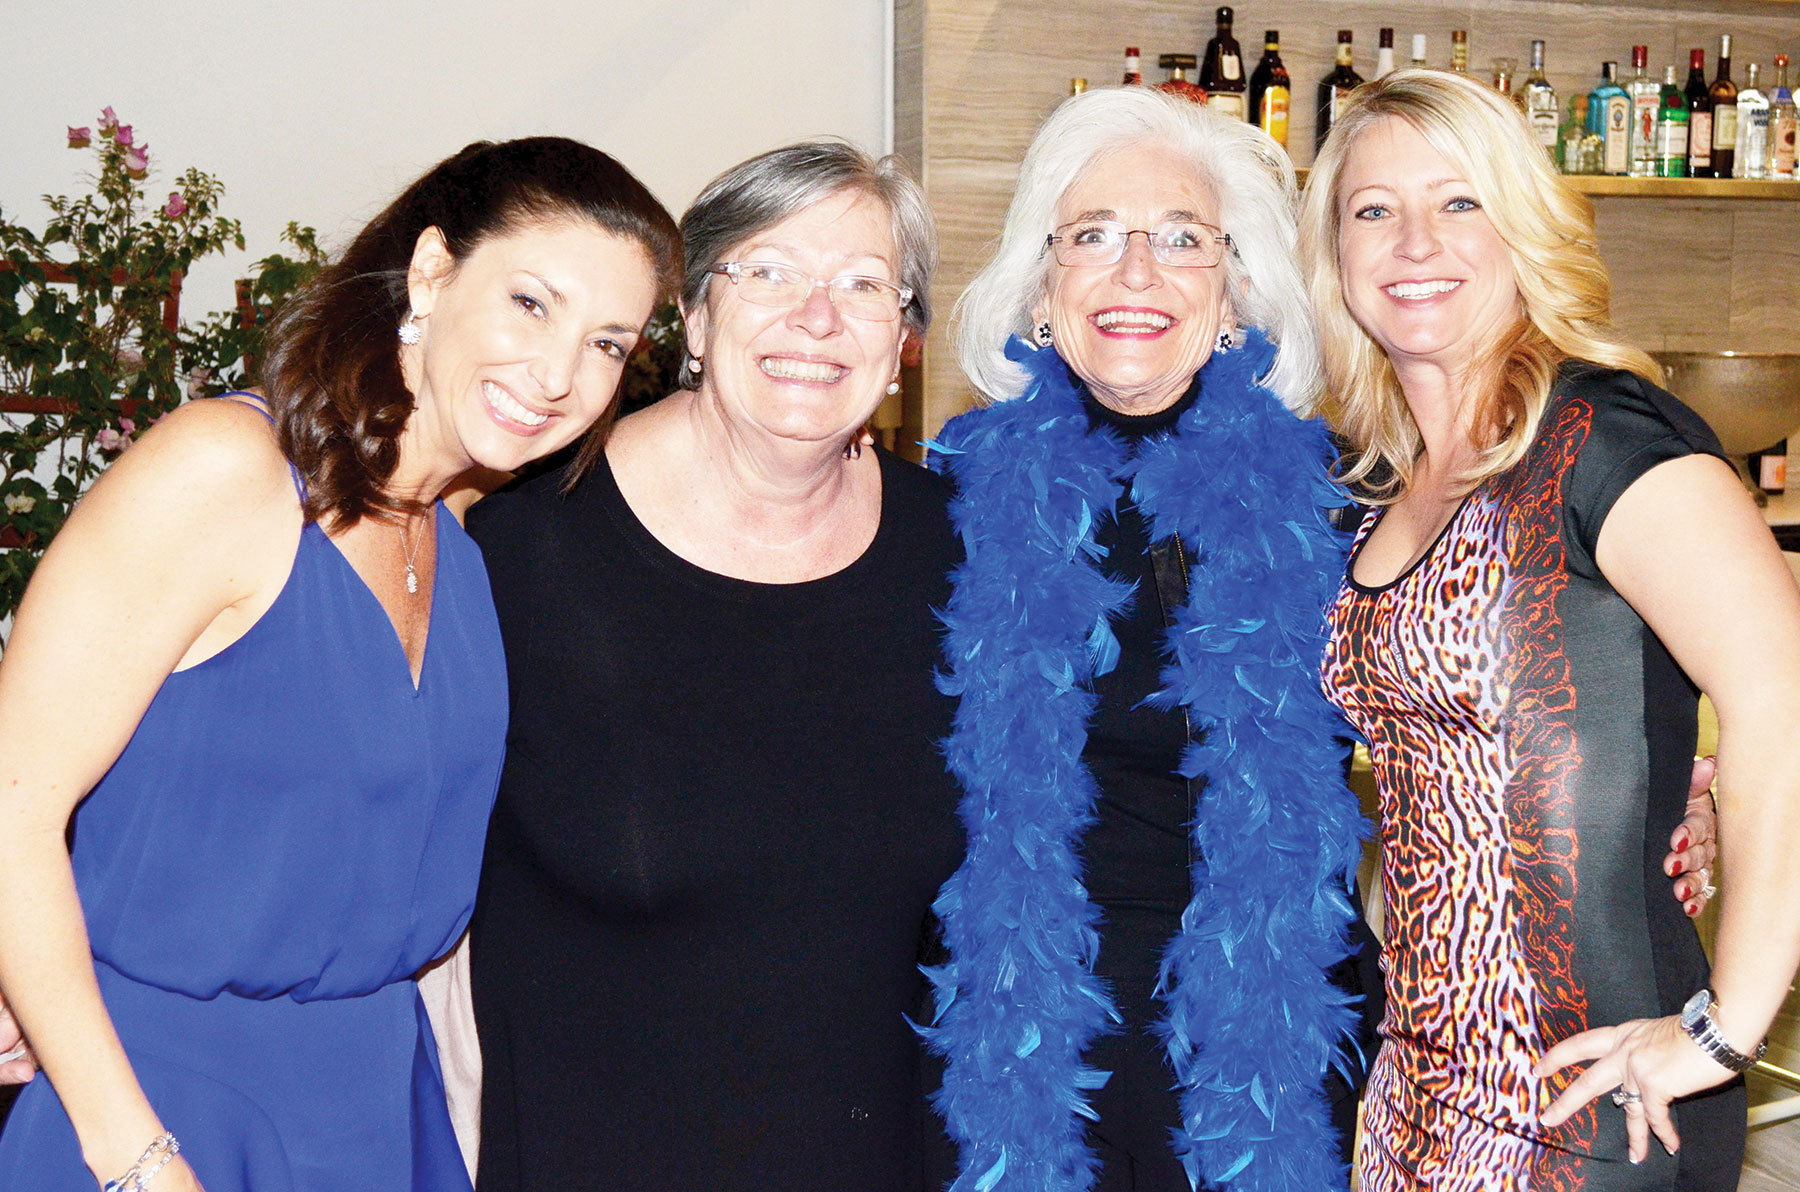 Co-Chairs Donna Koffman and Peg Roberts, Graci McGillicuddy and Co-Chair Nikki Williams at Blue Ties & Butterflies pre-party Feb. 19. Photo by Heather Merriman.